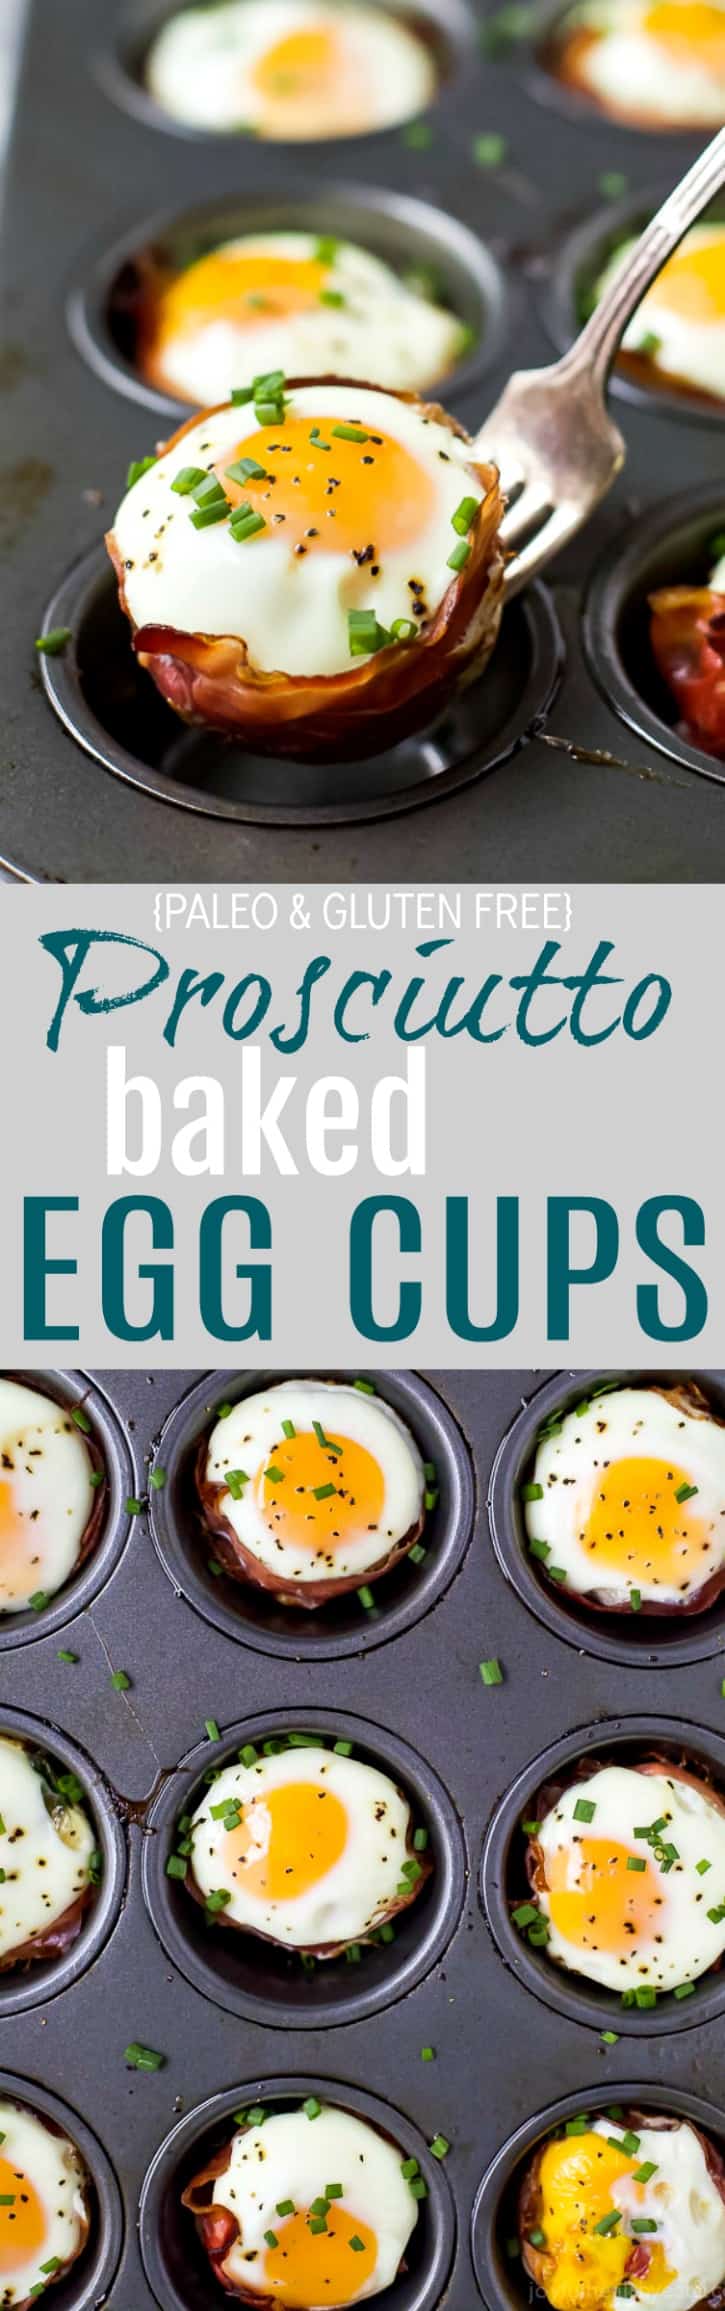 {paleo & gluten free} PROSCIUTTO BAKED EGG CUPS an easy meal prep breakfast the family will love. These grab 'n 'go baked egg cups boast a healthy 10 grams of protein per serving with only 116 calories!